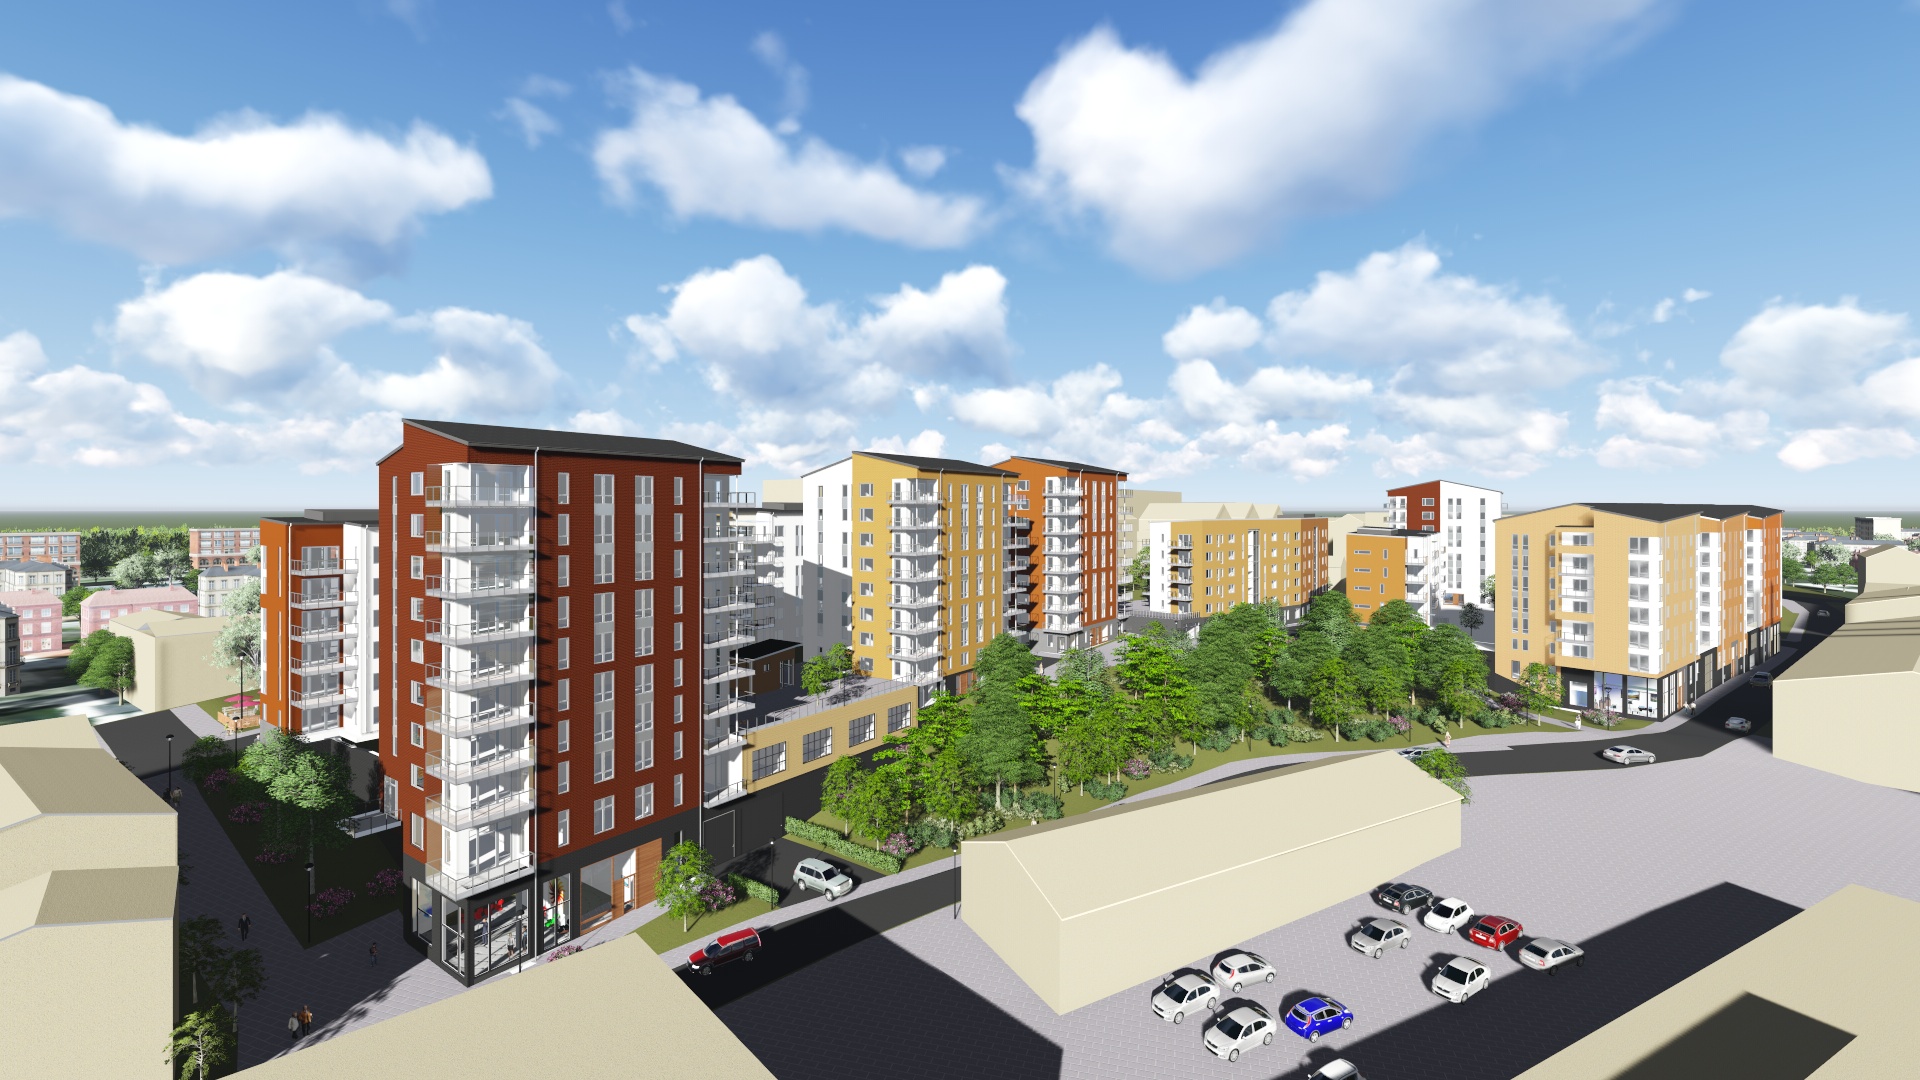 Skanska partners with Lundbergs to build 392 rental apartments in Norrköping, Sweden